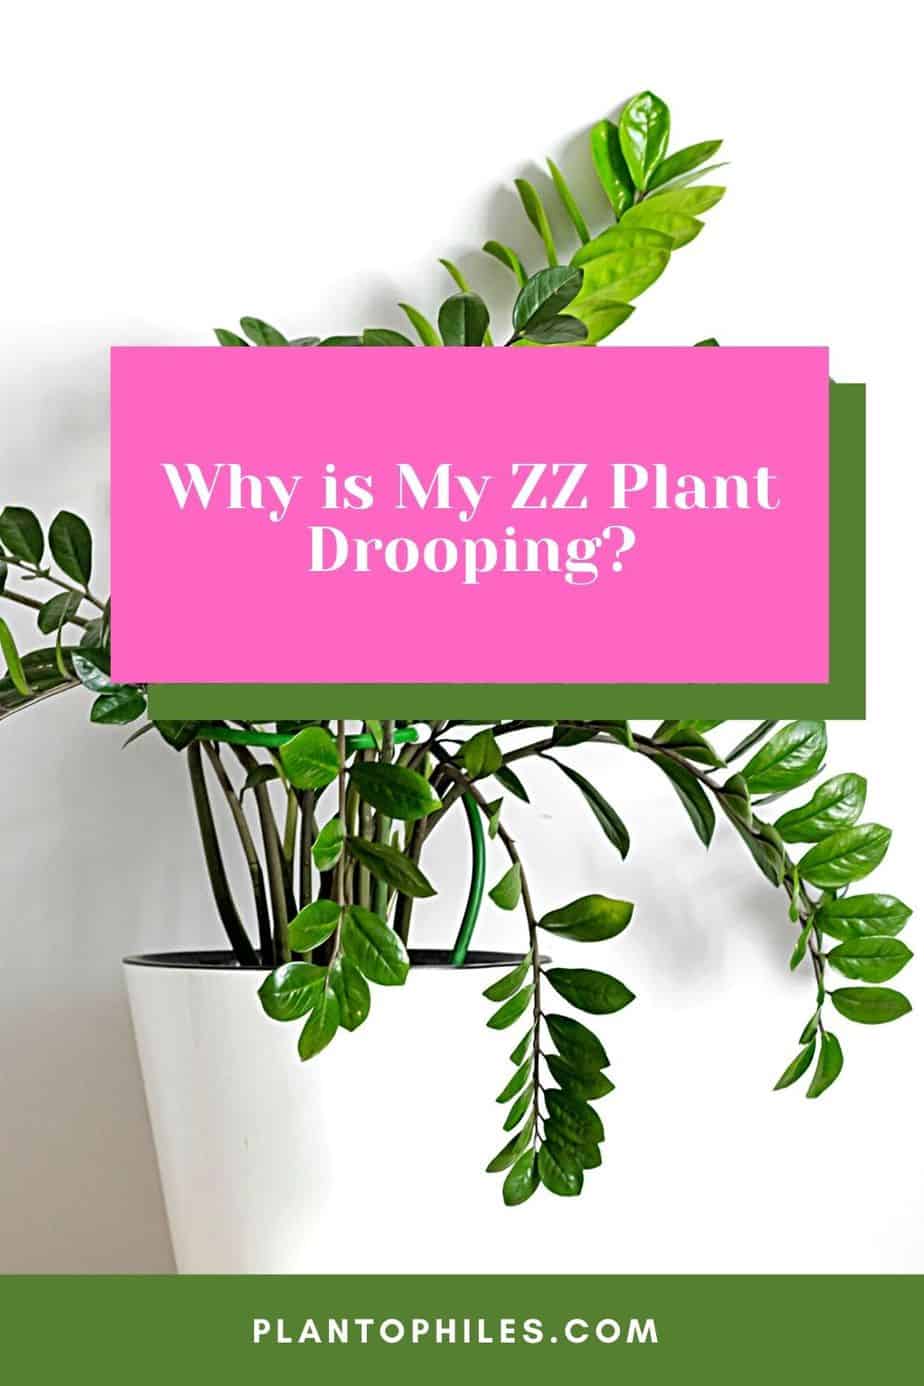 Why is my ZZ Plant Drooping